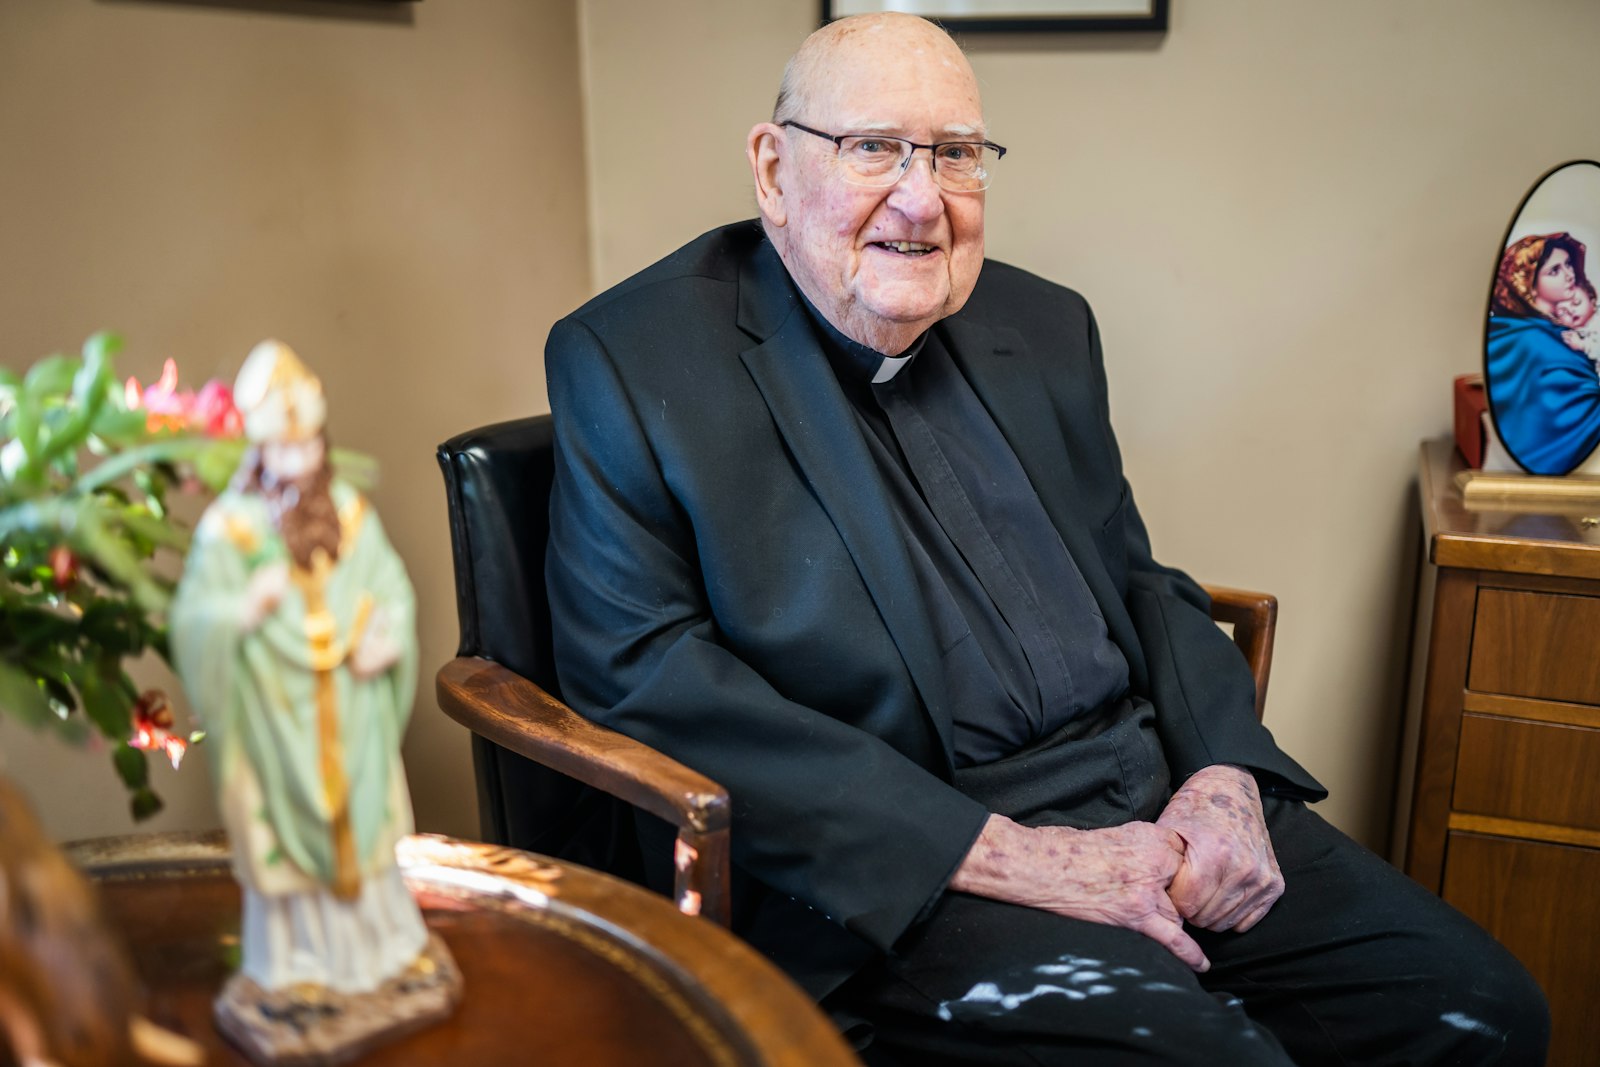 In addition to his longtime service as pastor of St. Anselm Parish in Dearborn Heights, Msgr. Moloney, 92, has directed the Archdiocese of Detroit's Society for the Propagation of the Faith for more than 50 years. Even recently, his efforts brought in more for the missions than any diocese in the United States.